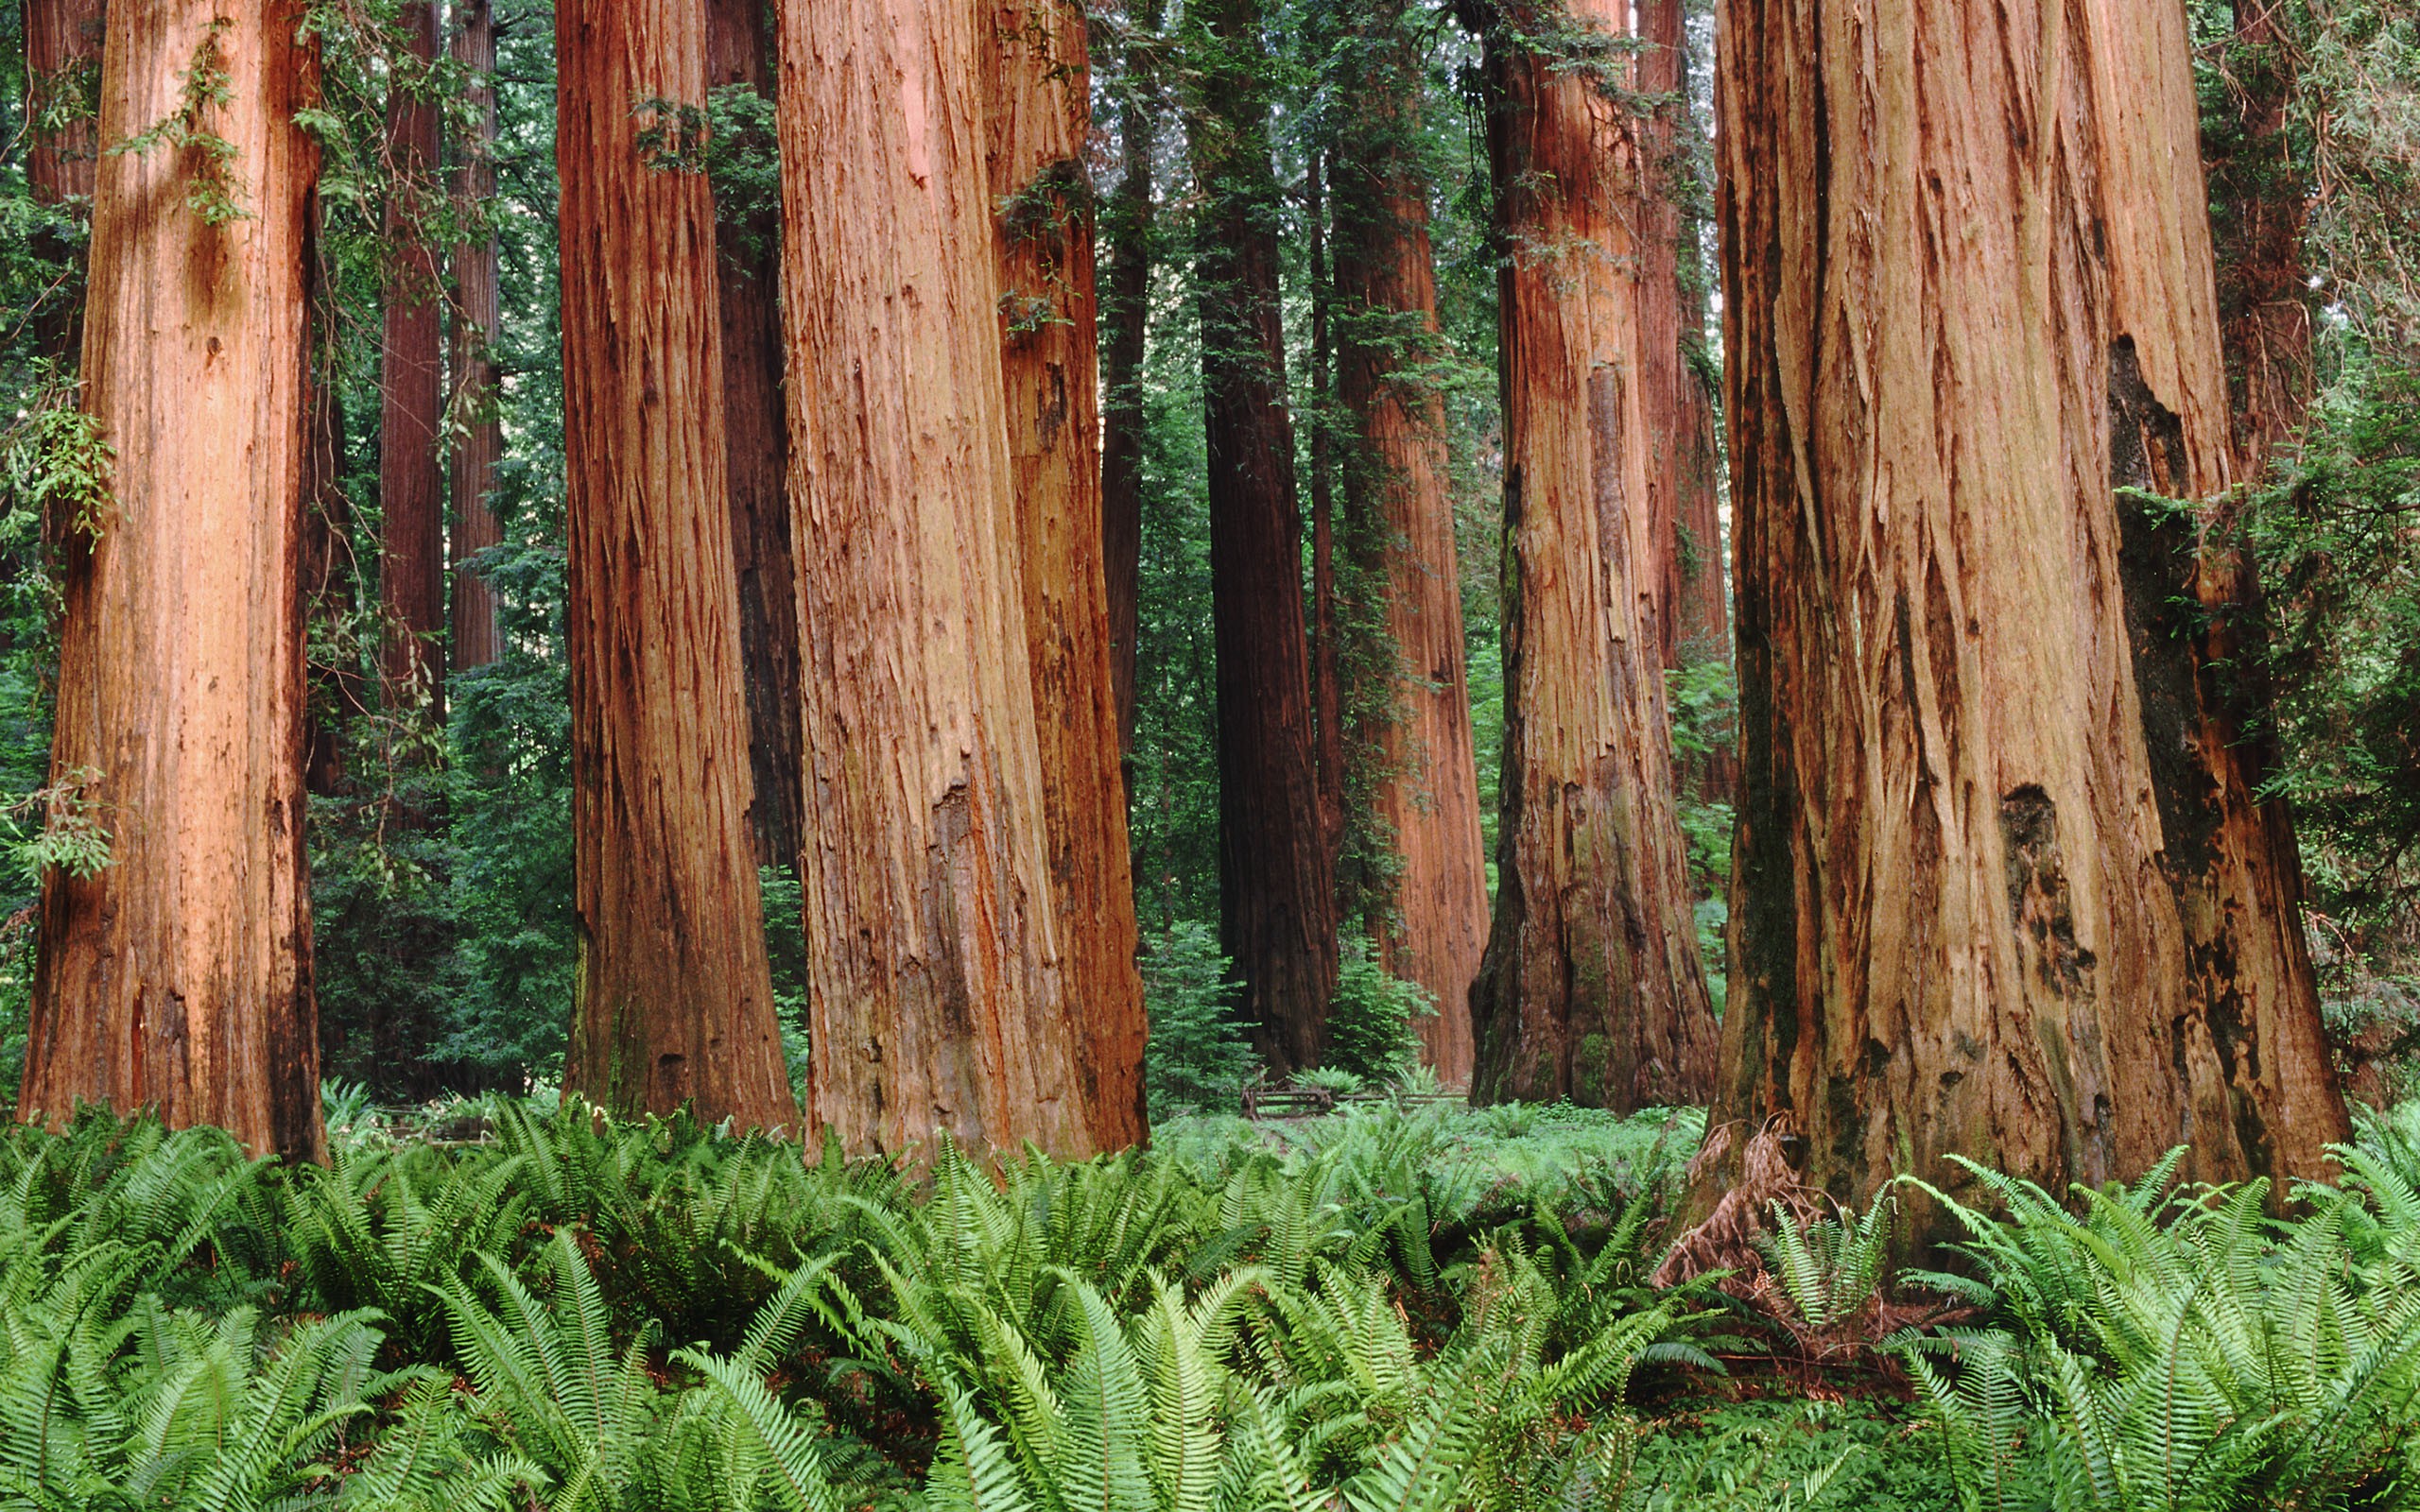 General 2560x1600 nature trees forest plants ferns leaves redwood sequoias